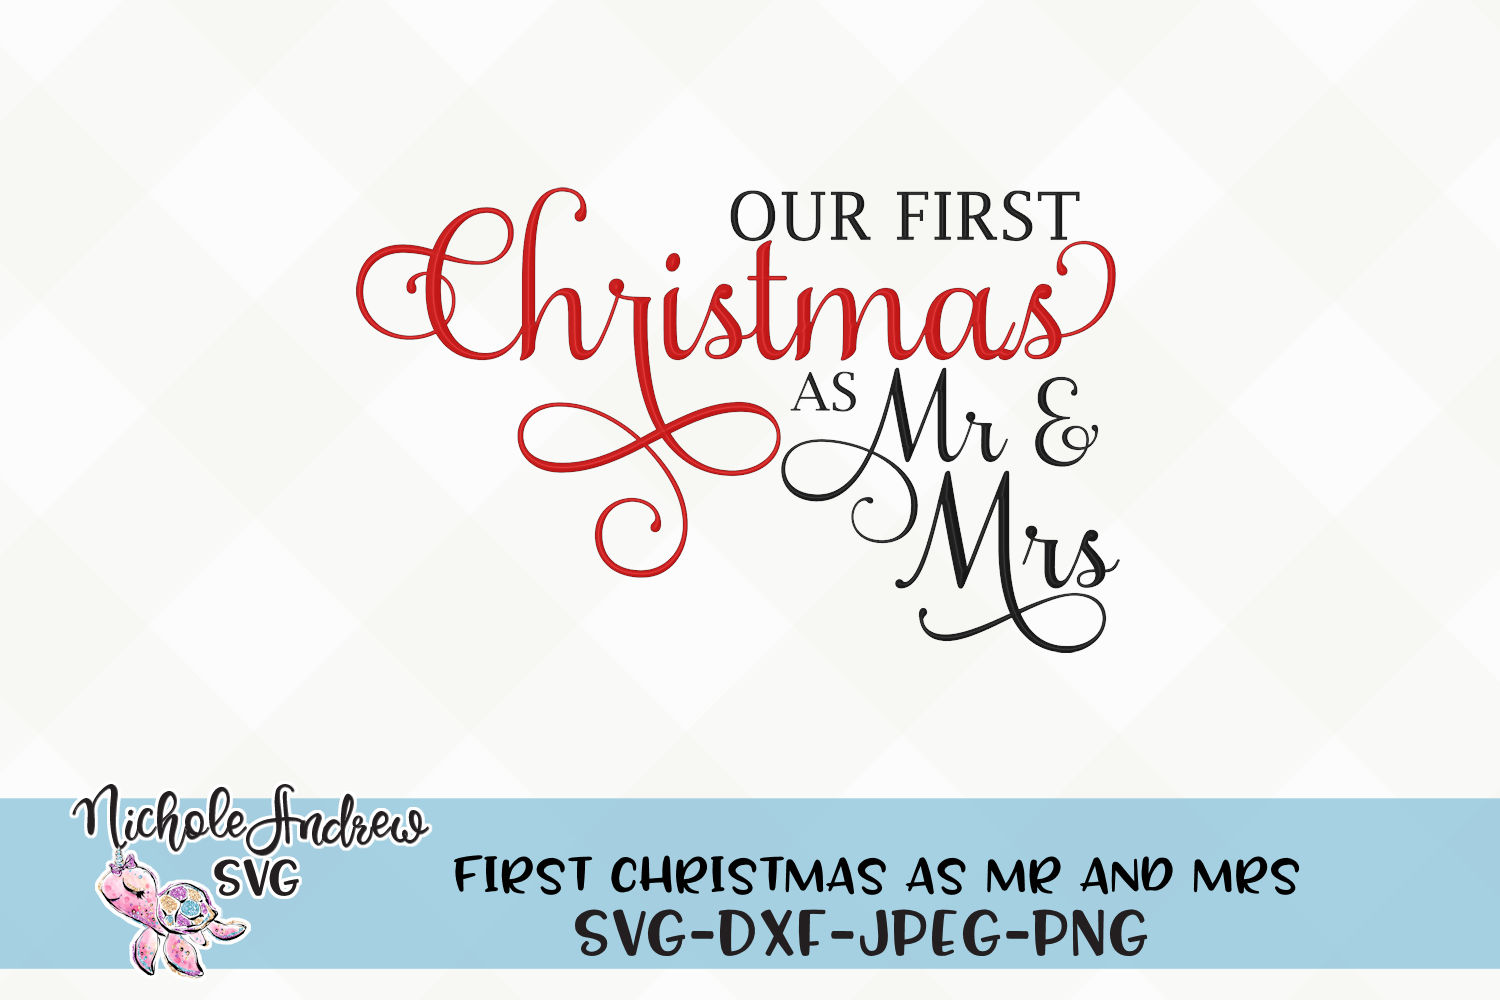 Our first Christmas as mr and mrs, svg (126588) | SVGs | Design Bundles